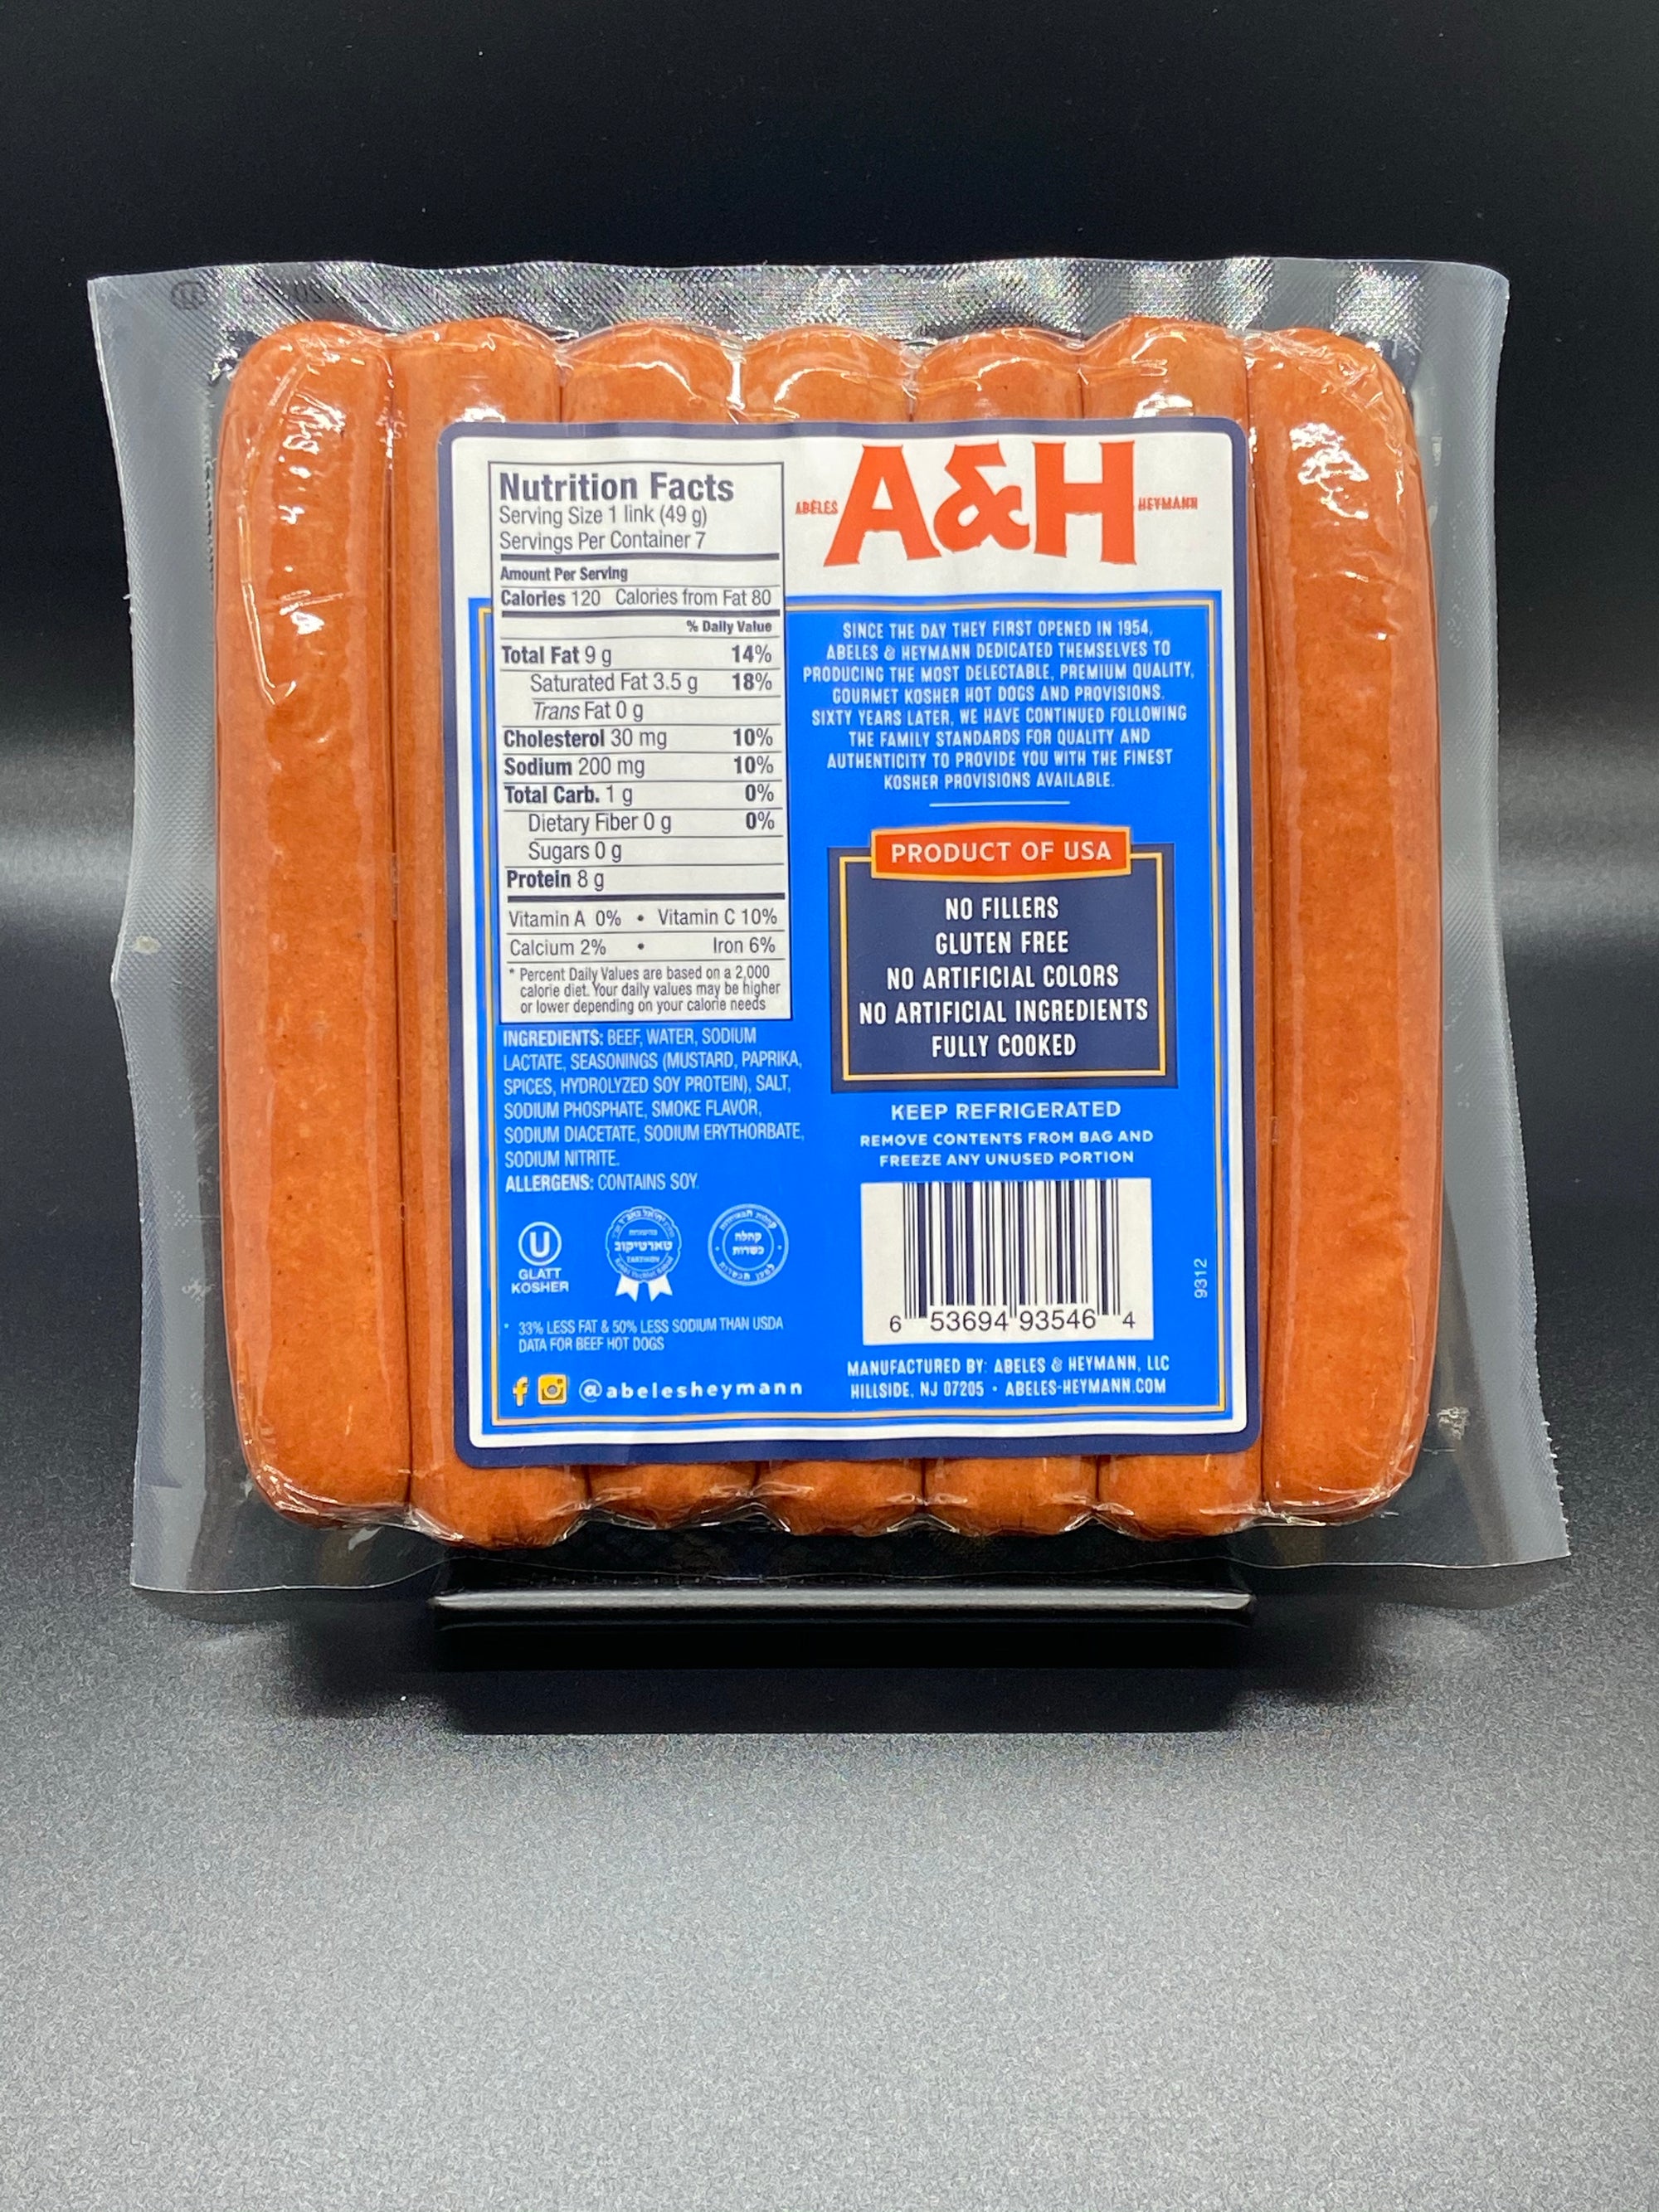 A &amp; H All Beef Reduced Fat &amp; Sodium Kosher Hot Dogs 12 oz.